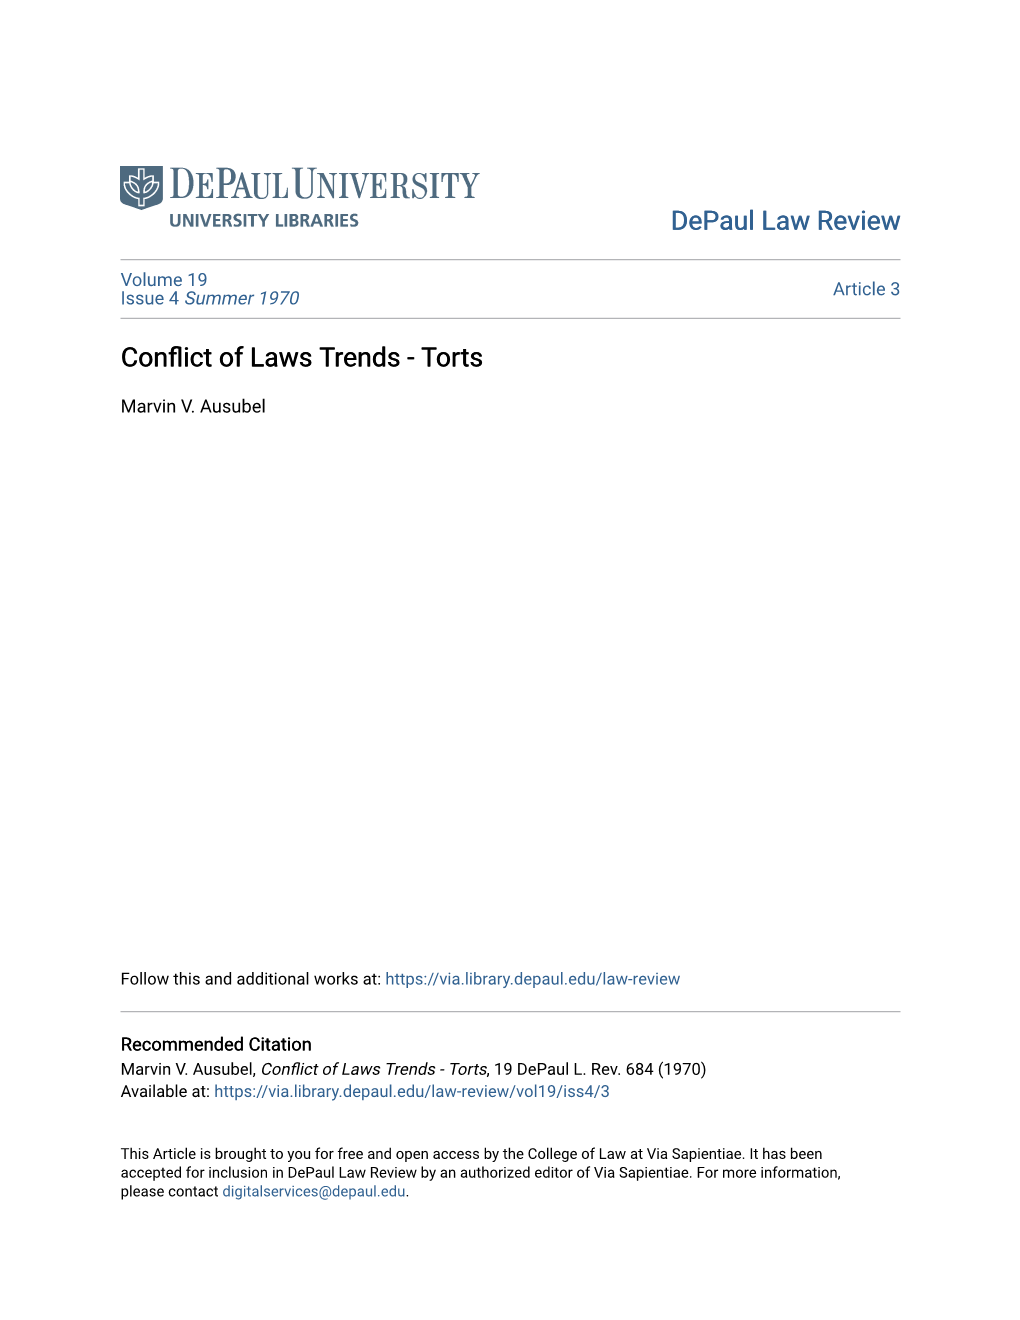 Conflict of Laws Trends-Torts